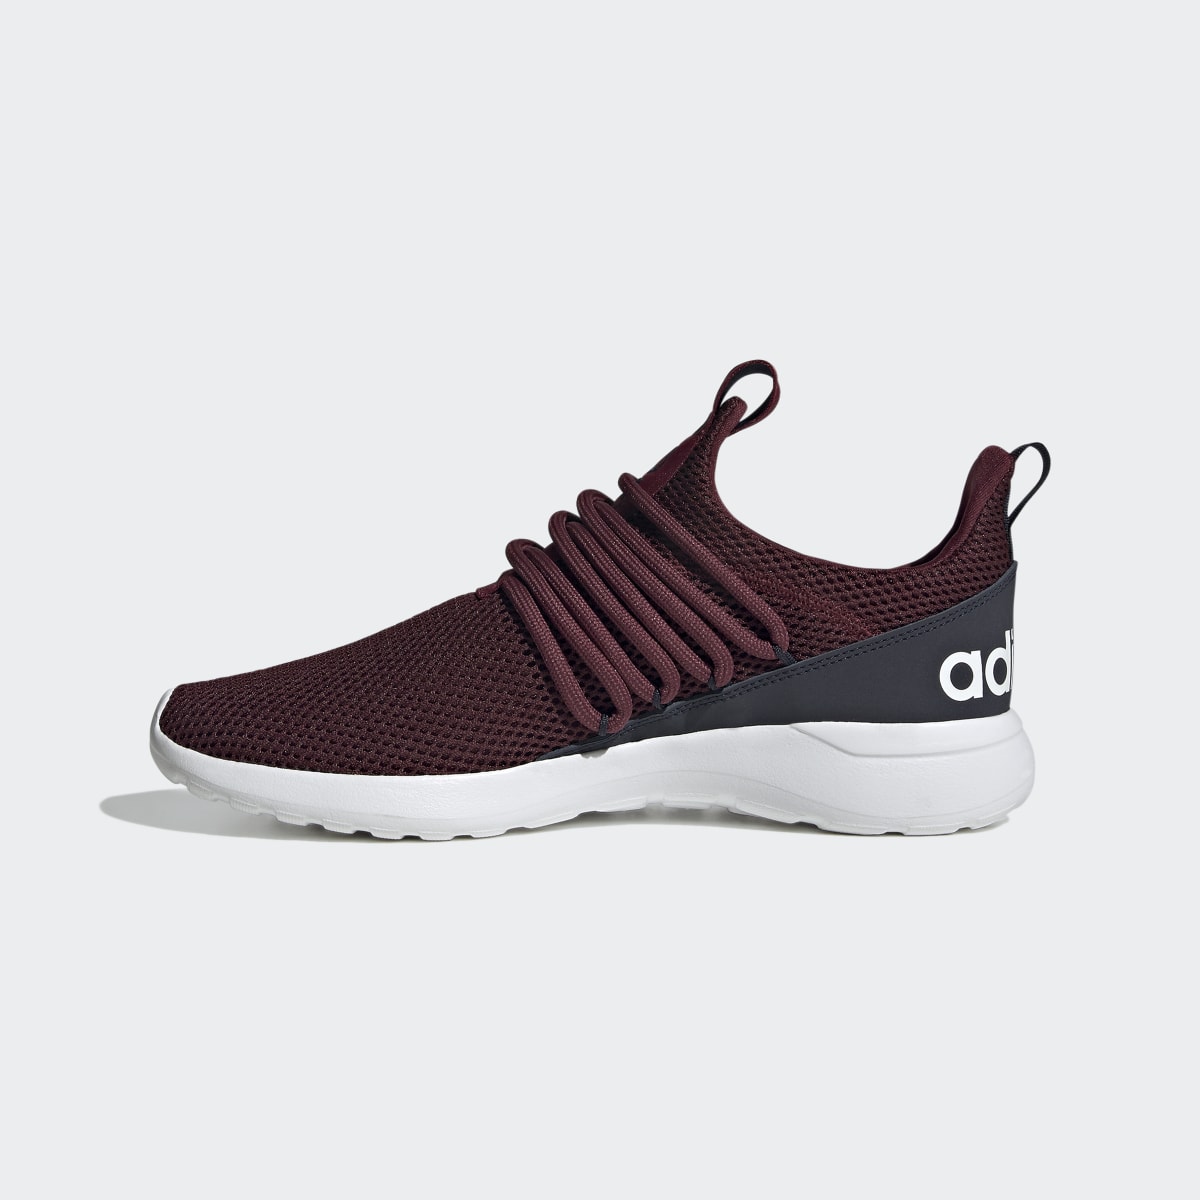 Adidas Lite Racer Adapt 3.0 Shoes. 7